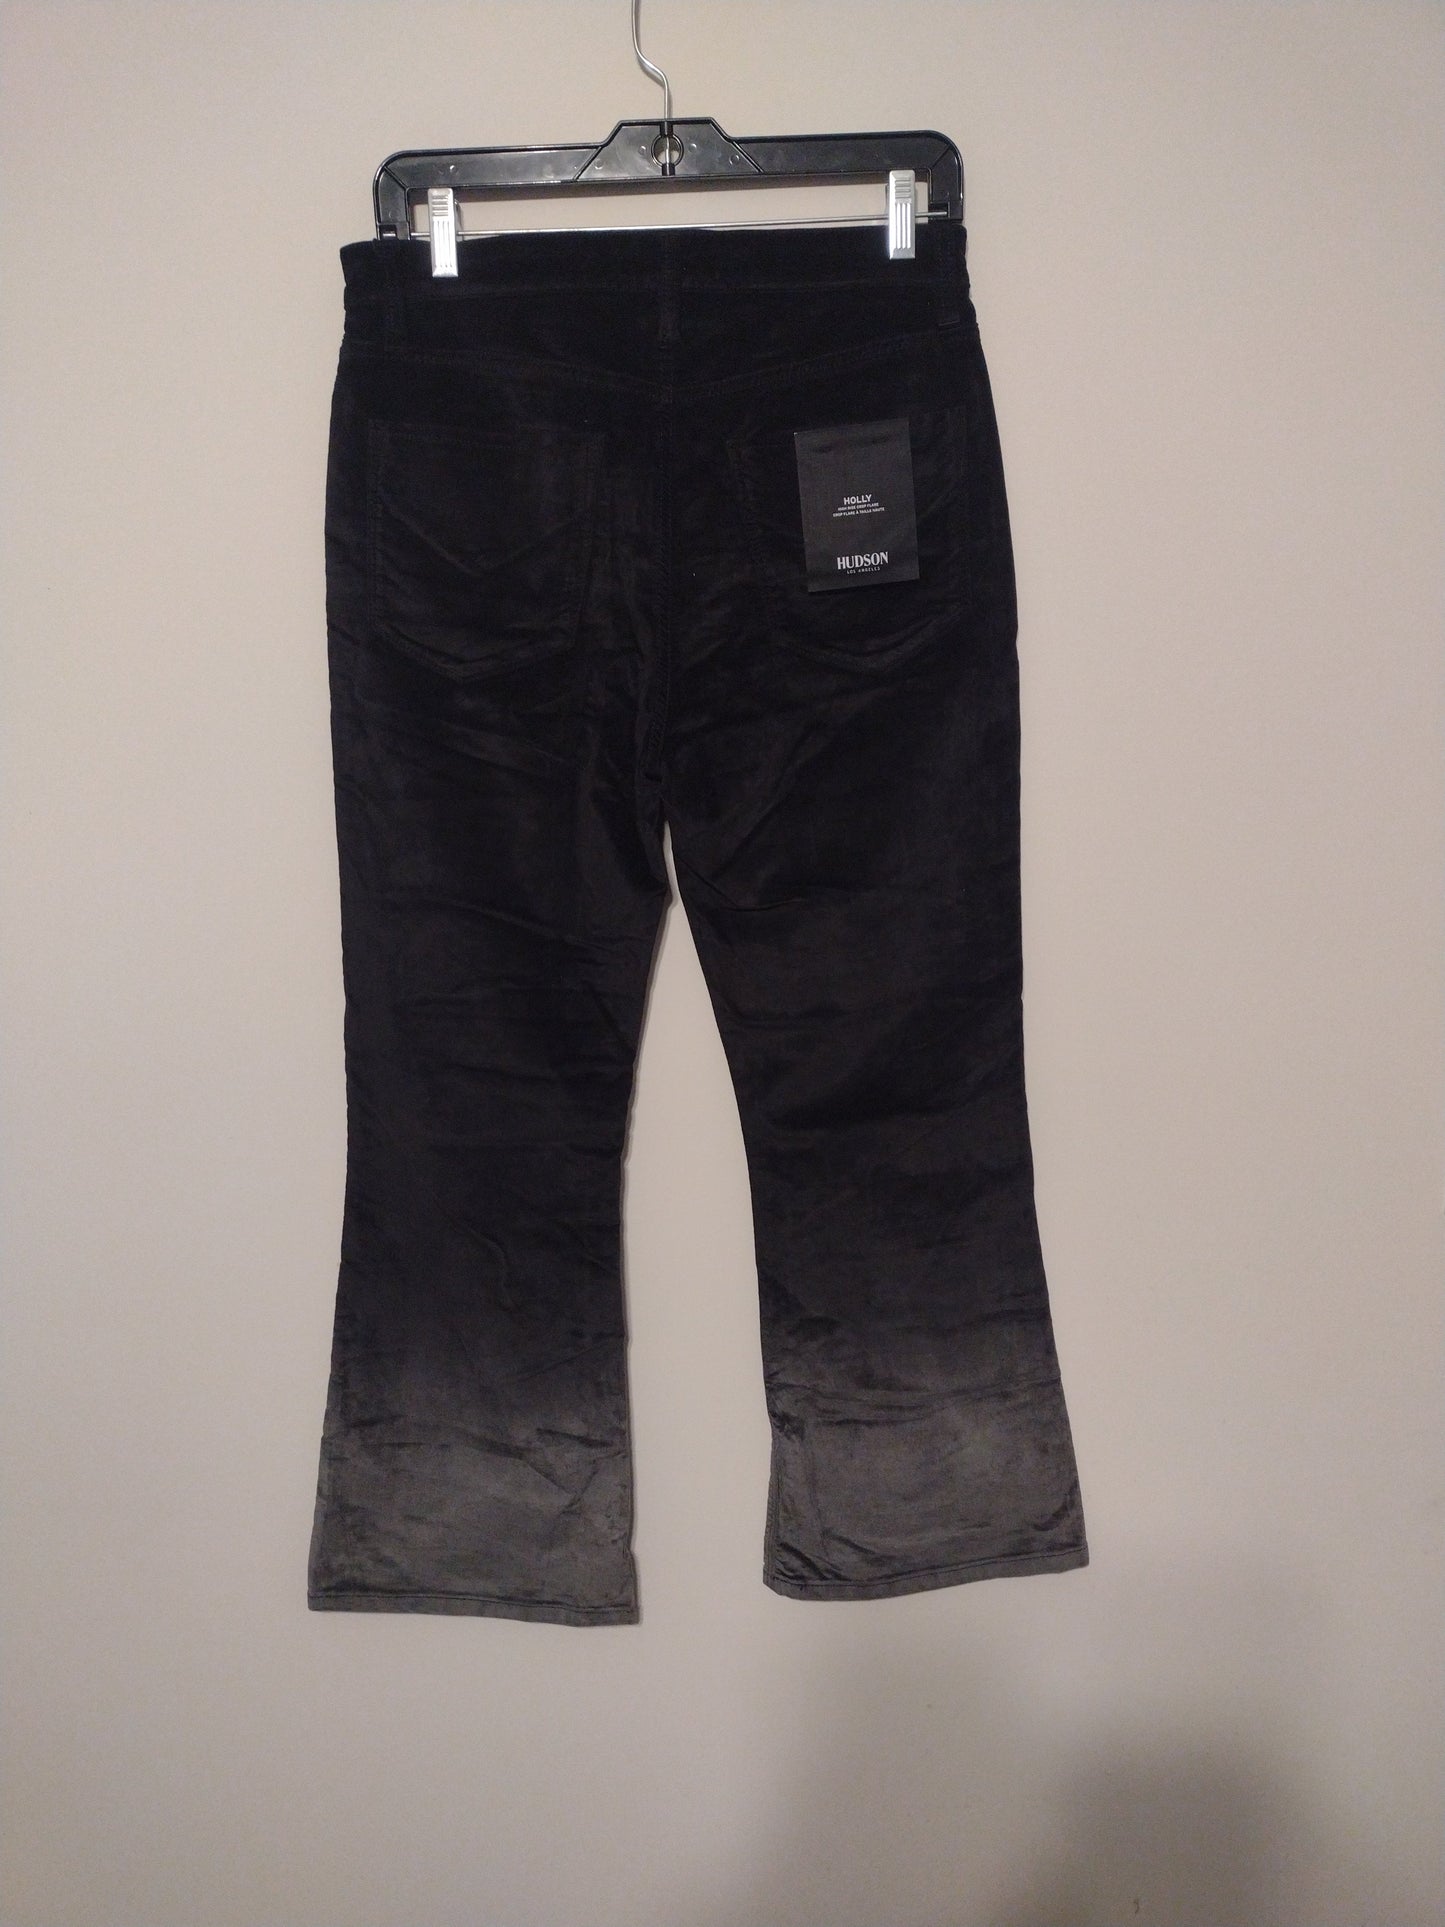 Pants Ankle By Hudson  Size: 8